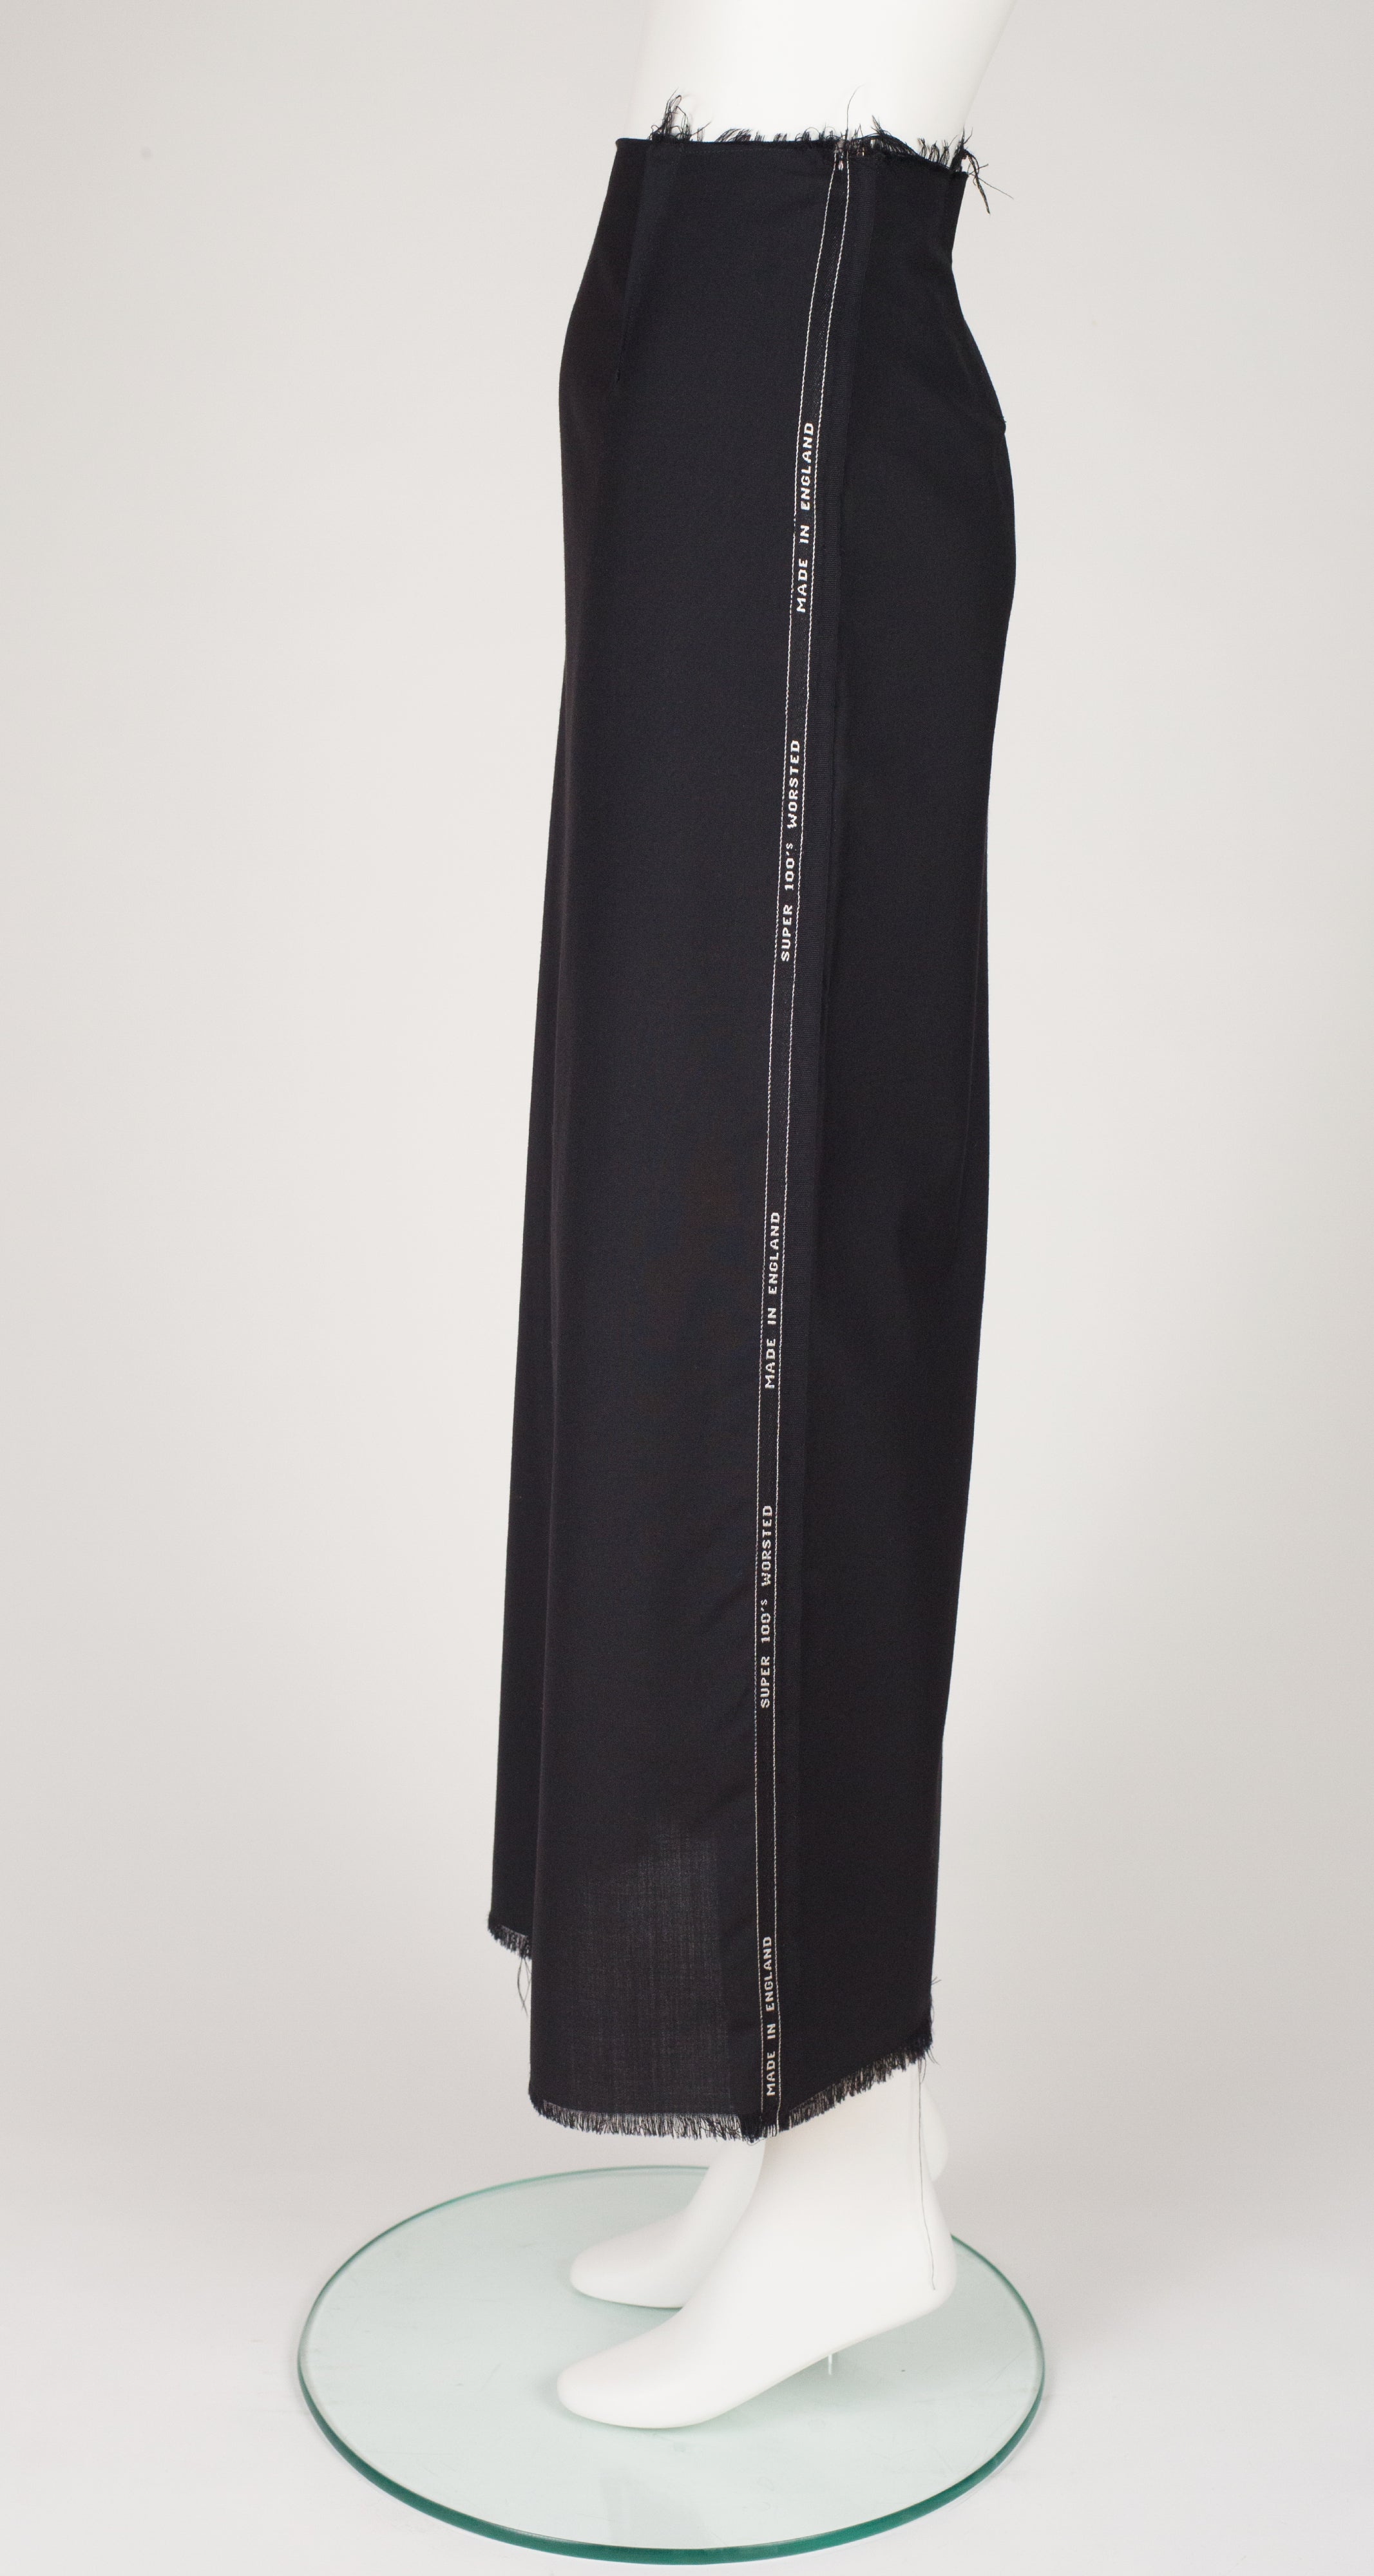 1997-98 F/W "Selvage" Deconstructed Black Wool Skirt